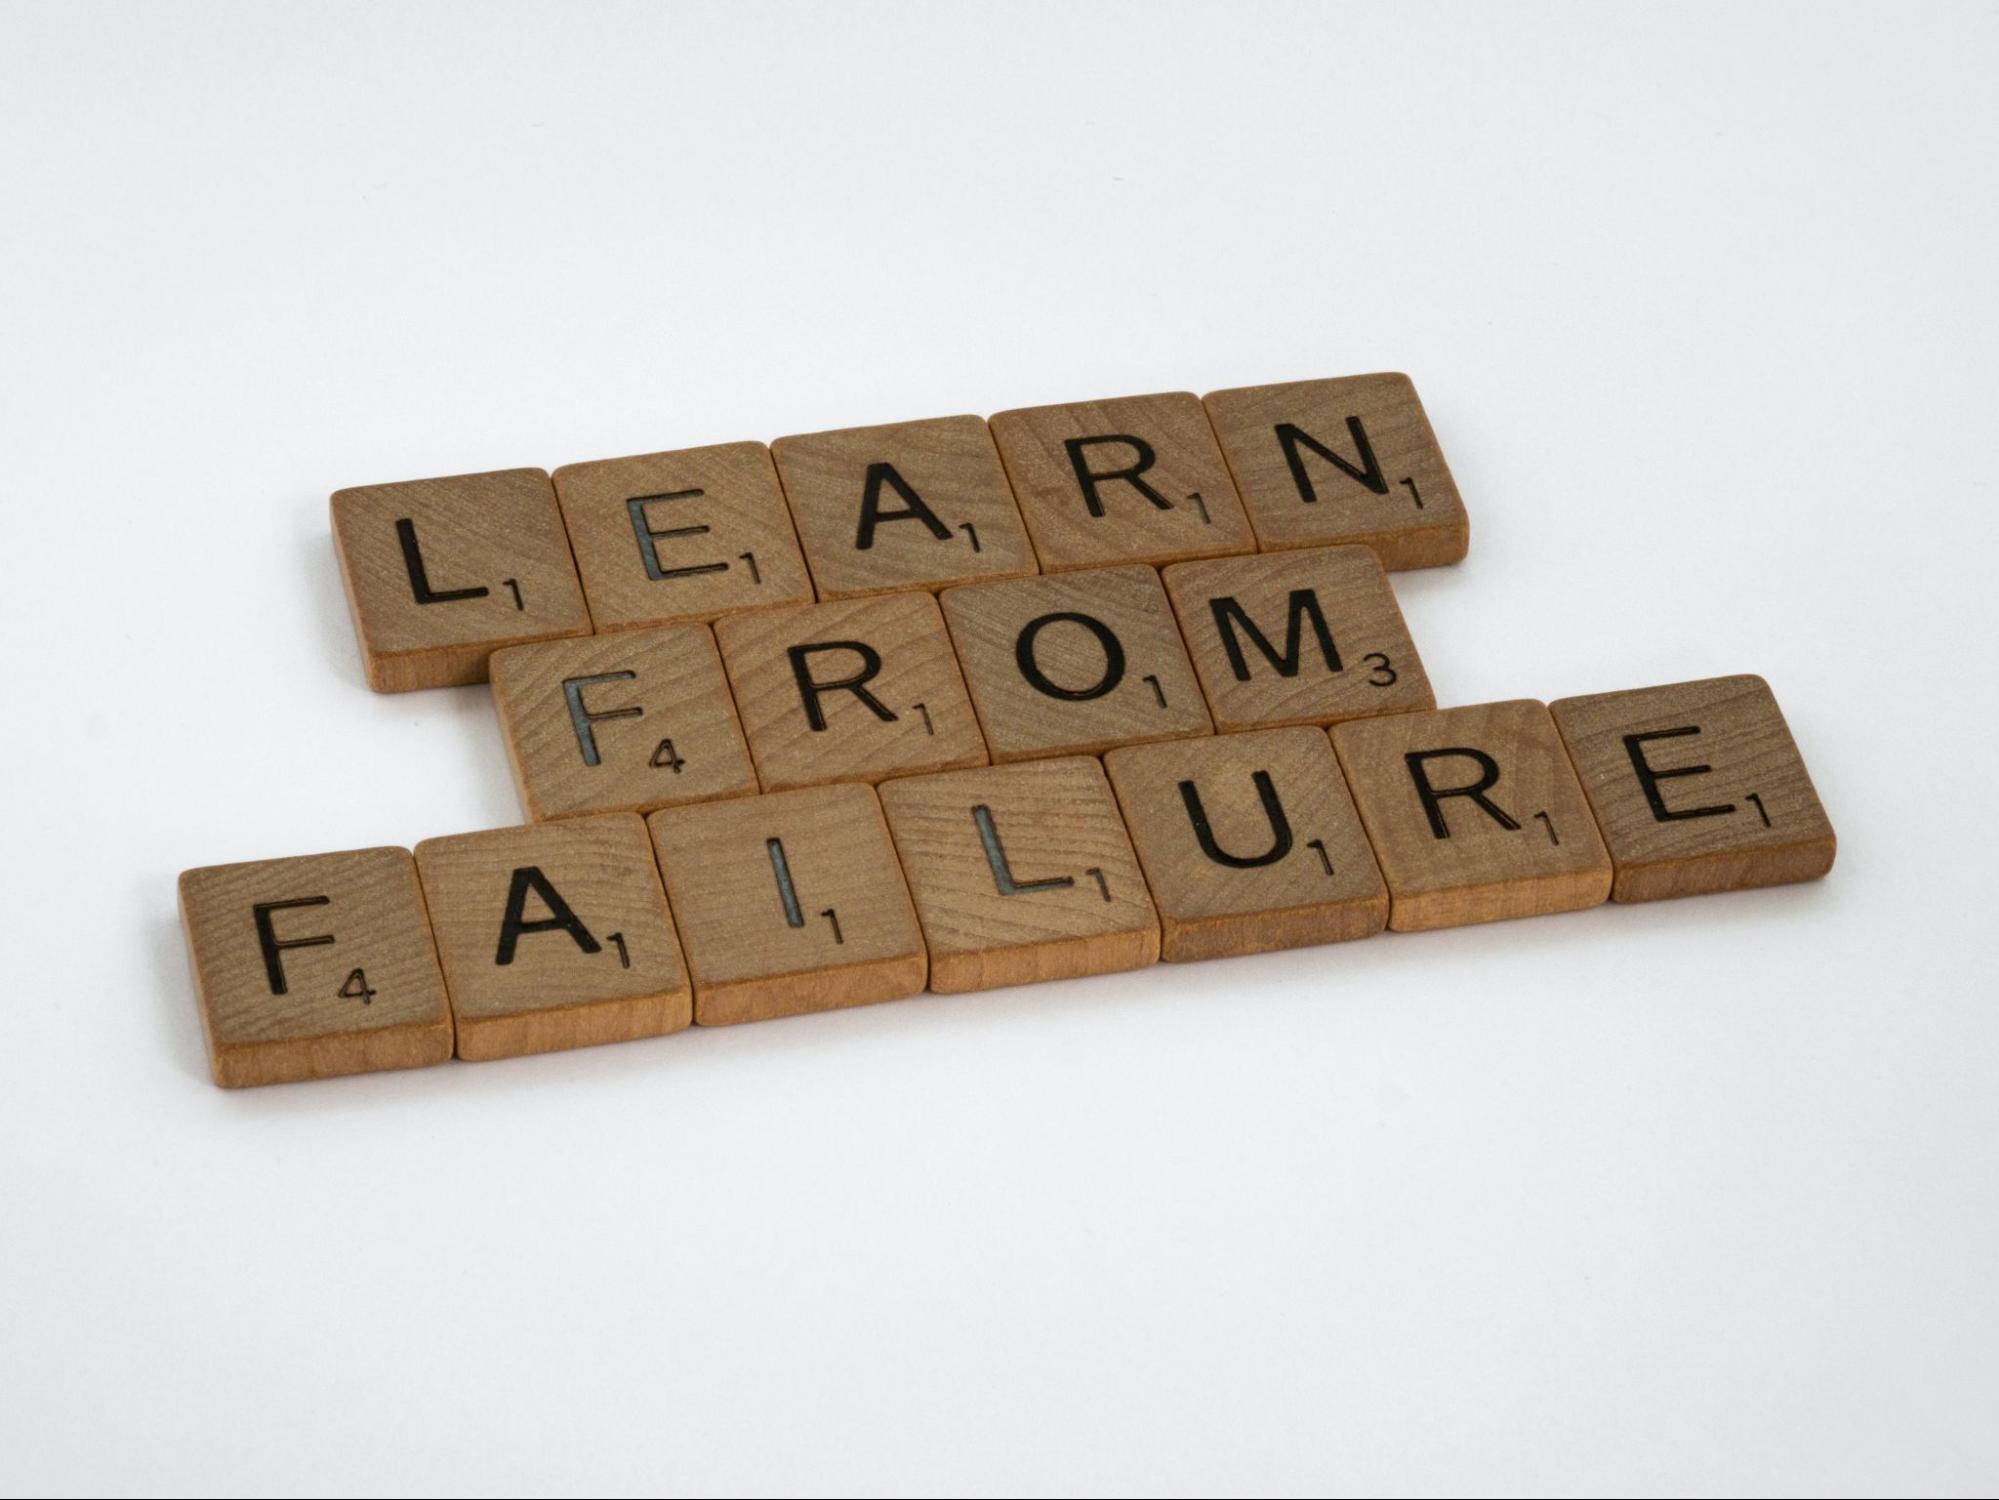 Reflections of a CEO: Learning From Your Mistakes